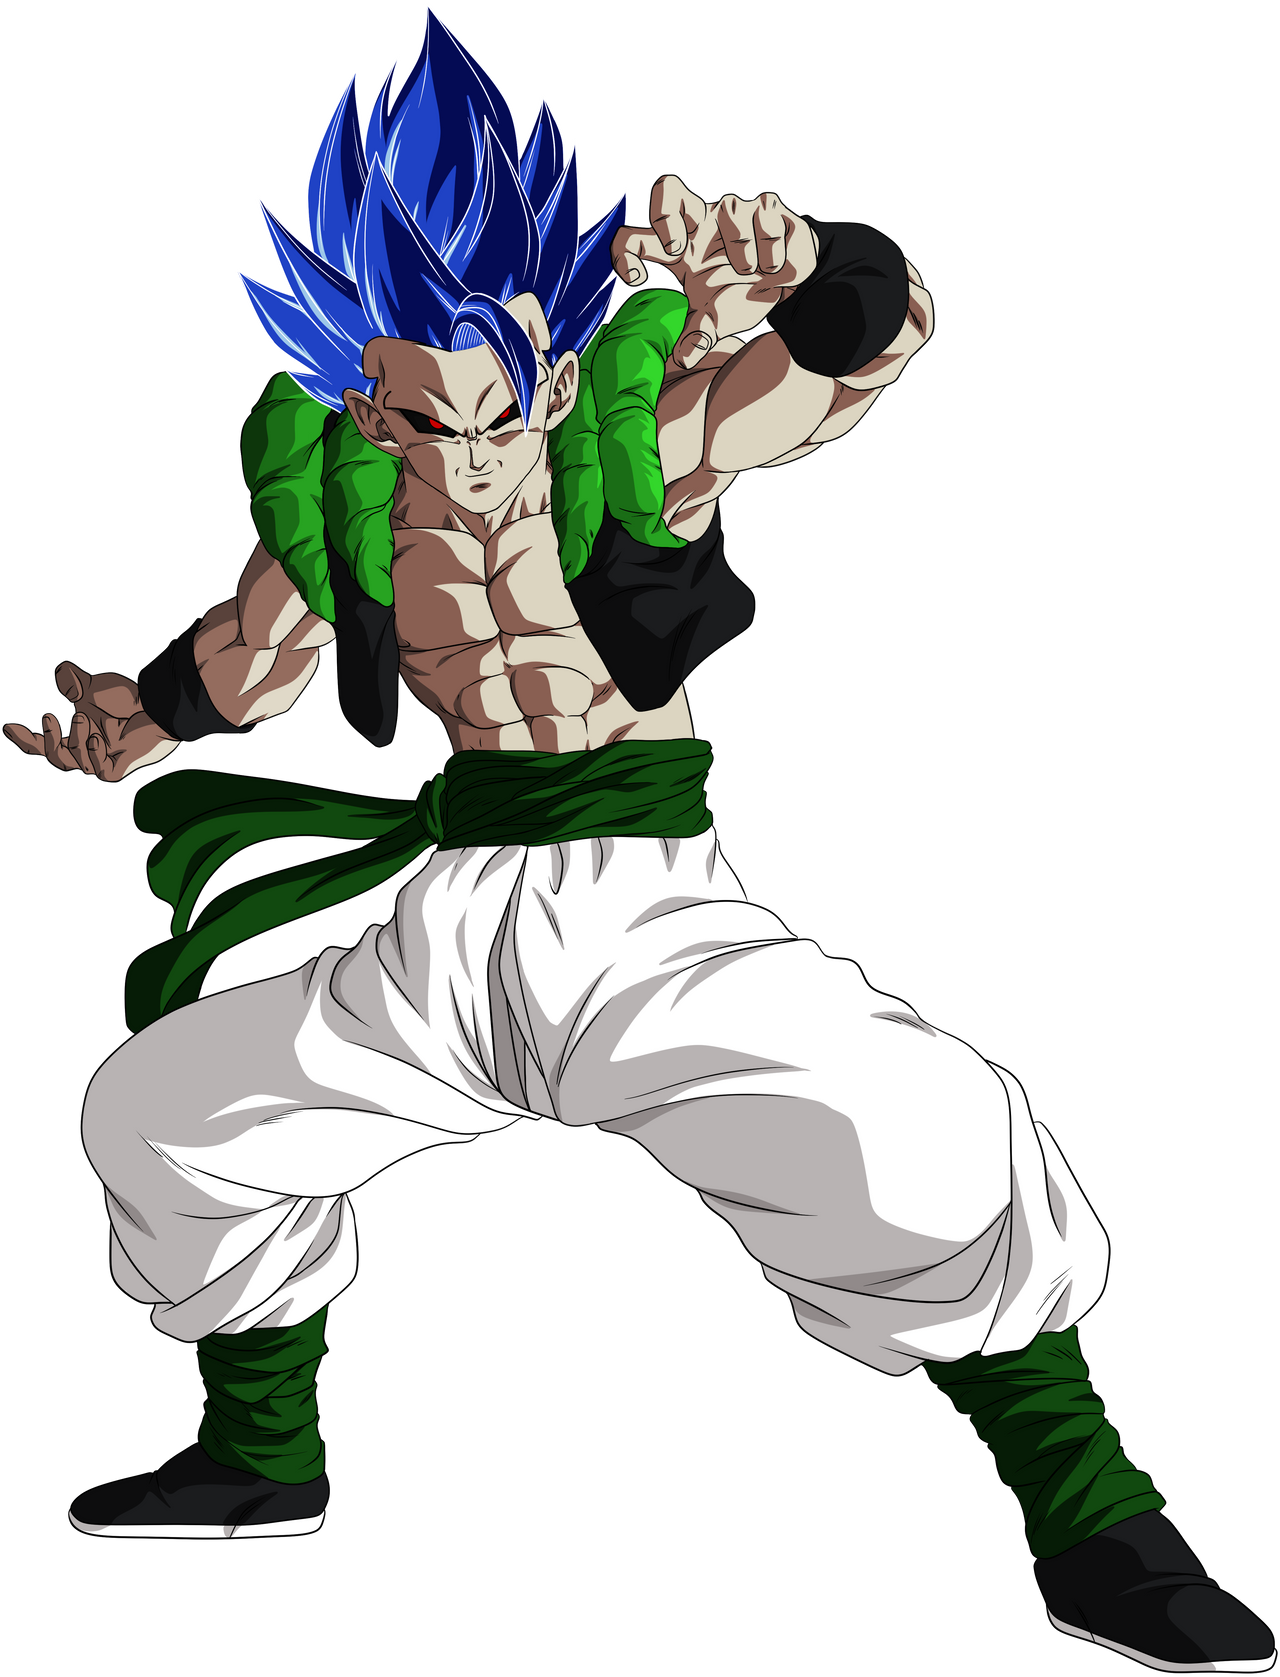 Pin by Gogeta<ssj7 on DBZ Posters, Sagas and fights,.